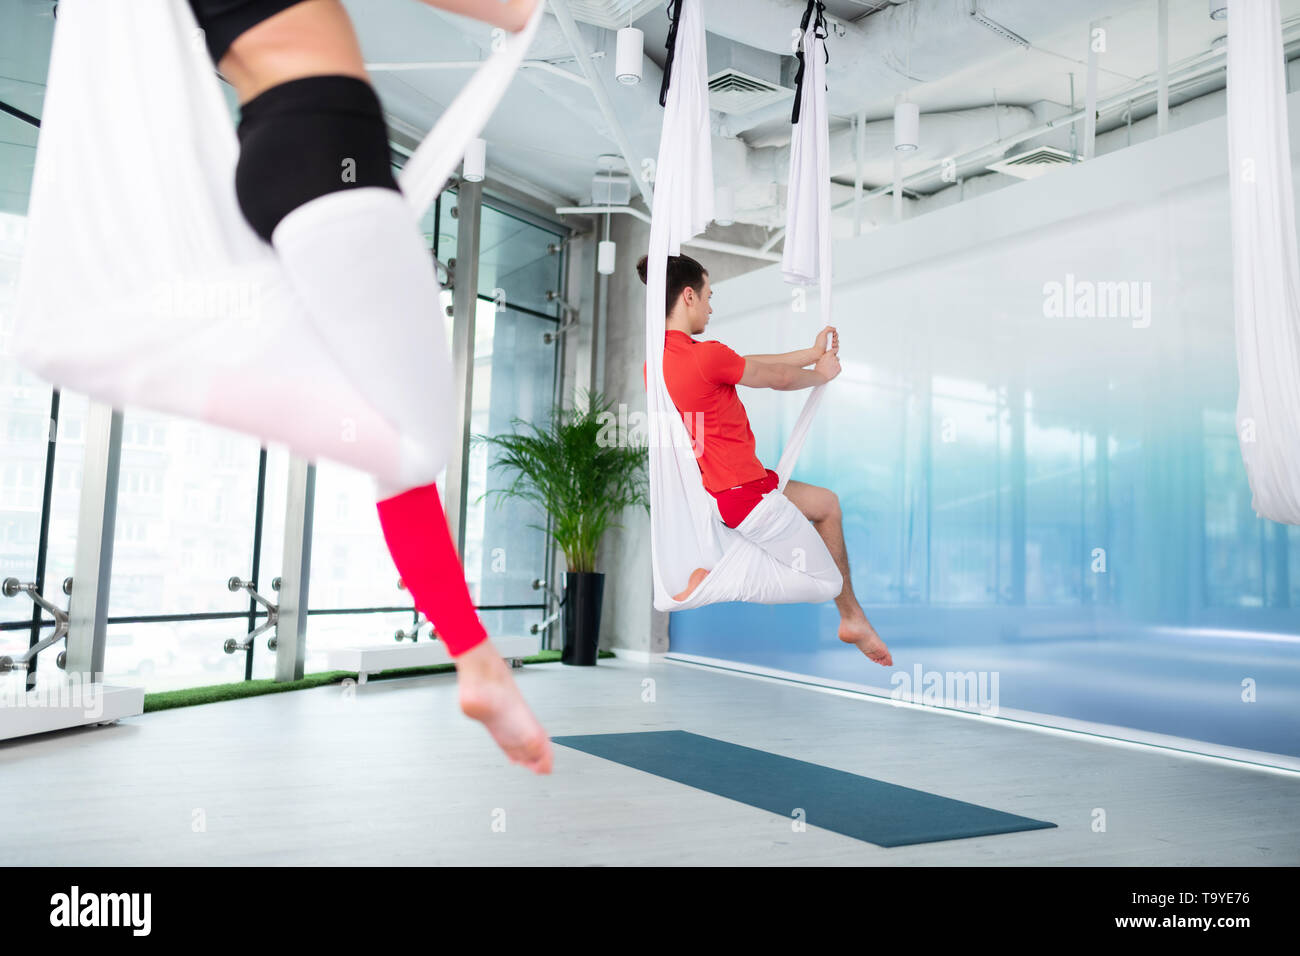 Man wearing t-shirt practicing aerial yoga attending group classes Stock Photo